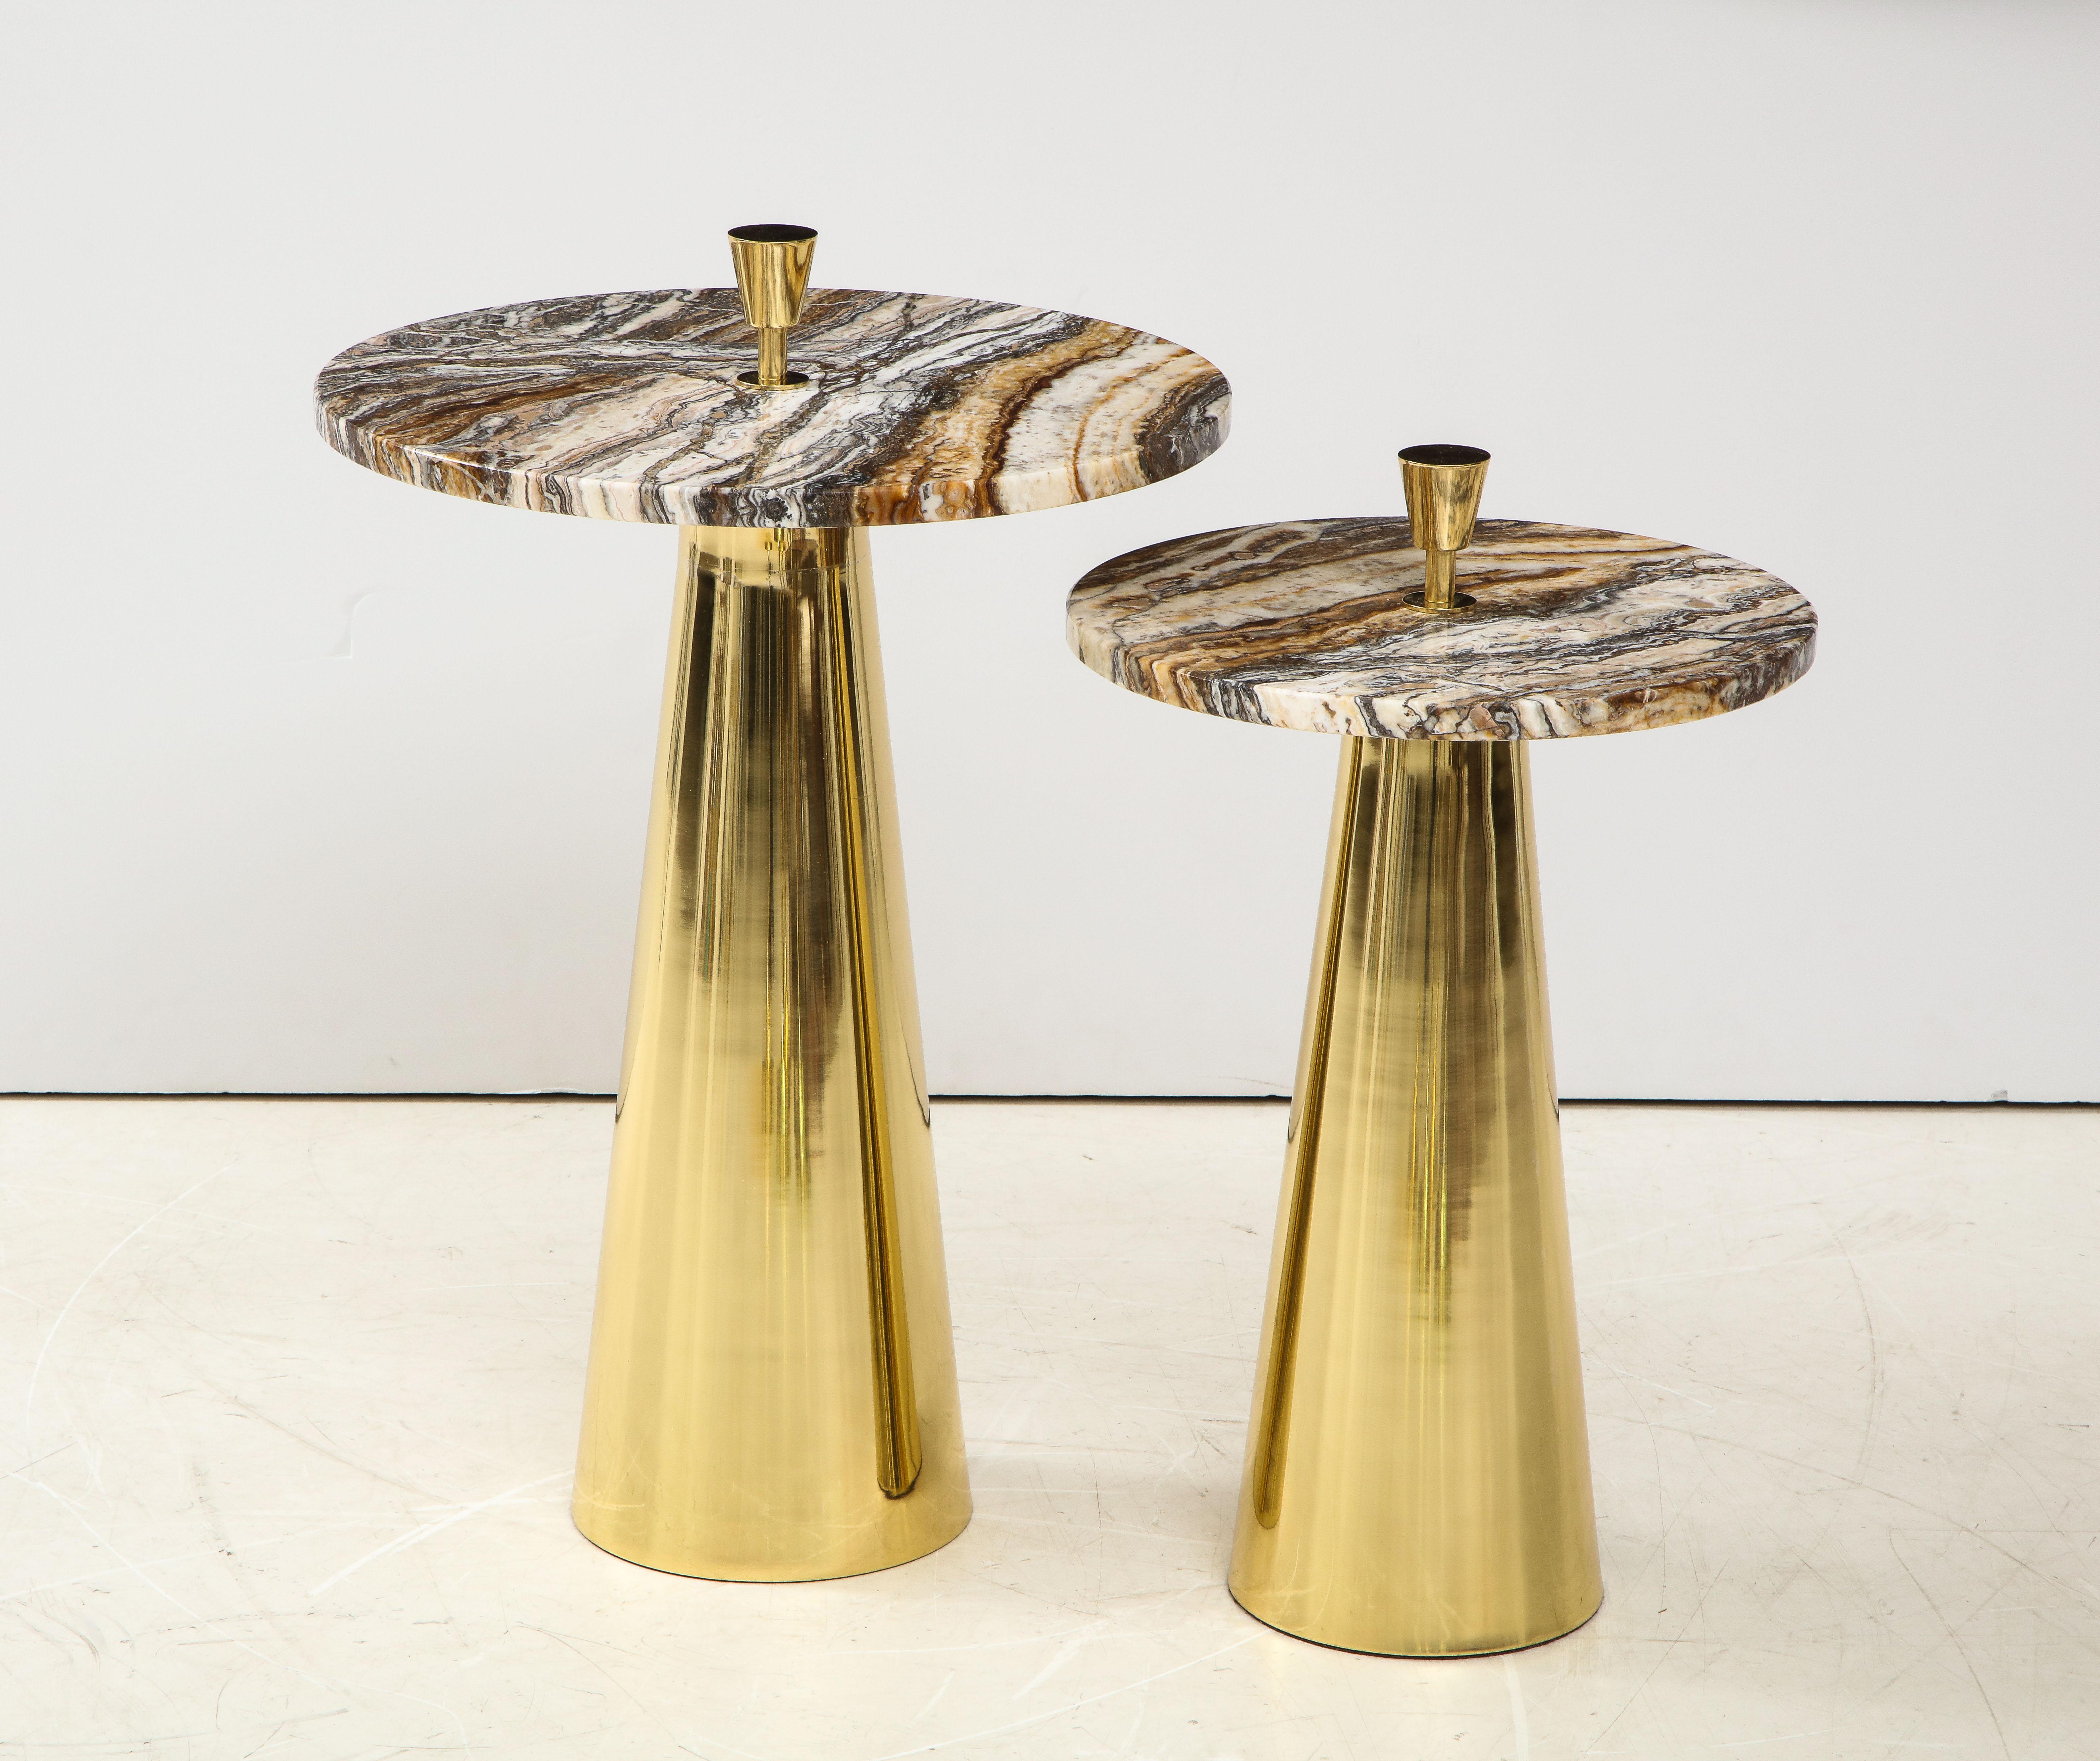 This pair of custom made round fantasy brown onyx marble top and brass side or martini tables were designed and hand crafted in Milan, Italy. Polished and rare fantasy brown onyx marble, which includes bold ivory and taupe veins, sits atop a conical